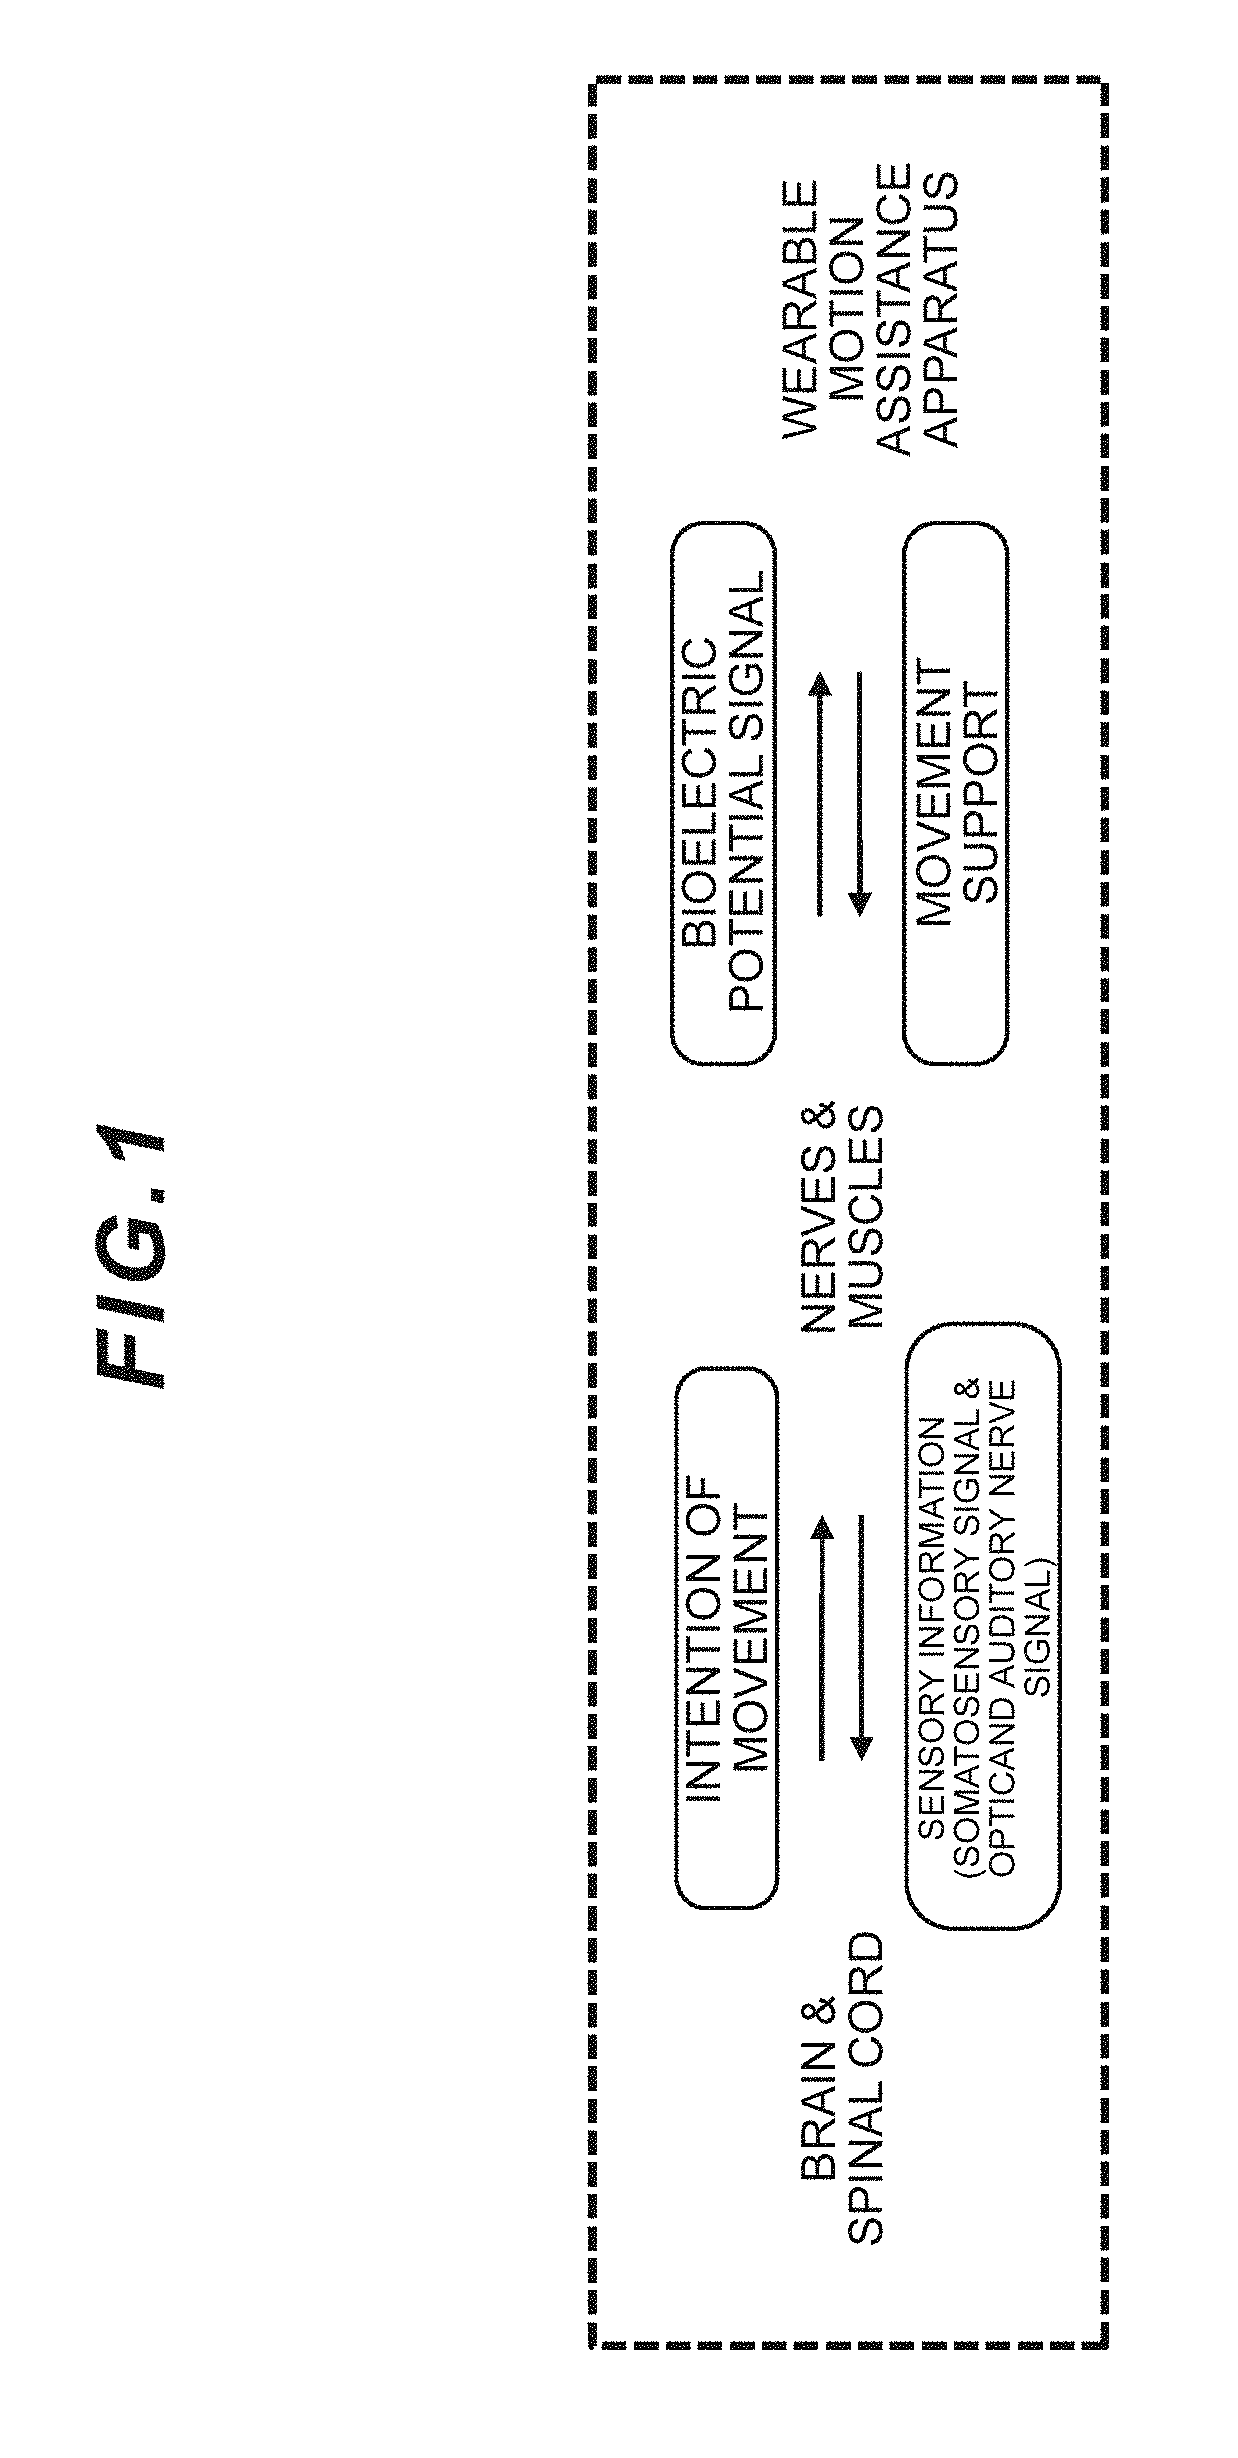 Biological activity detection apparatus and biological activity detection system